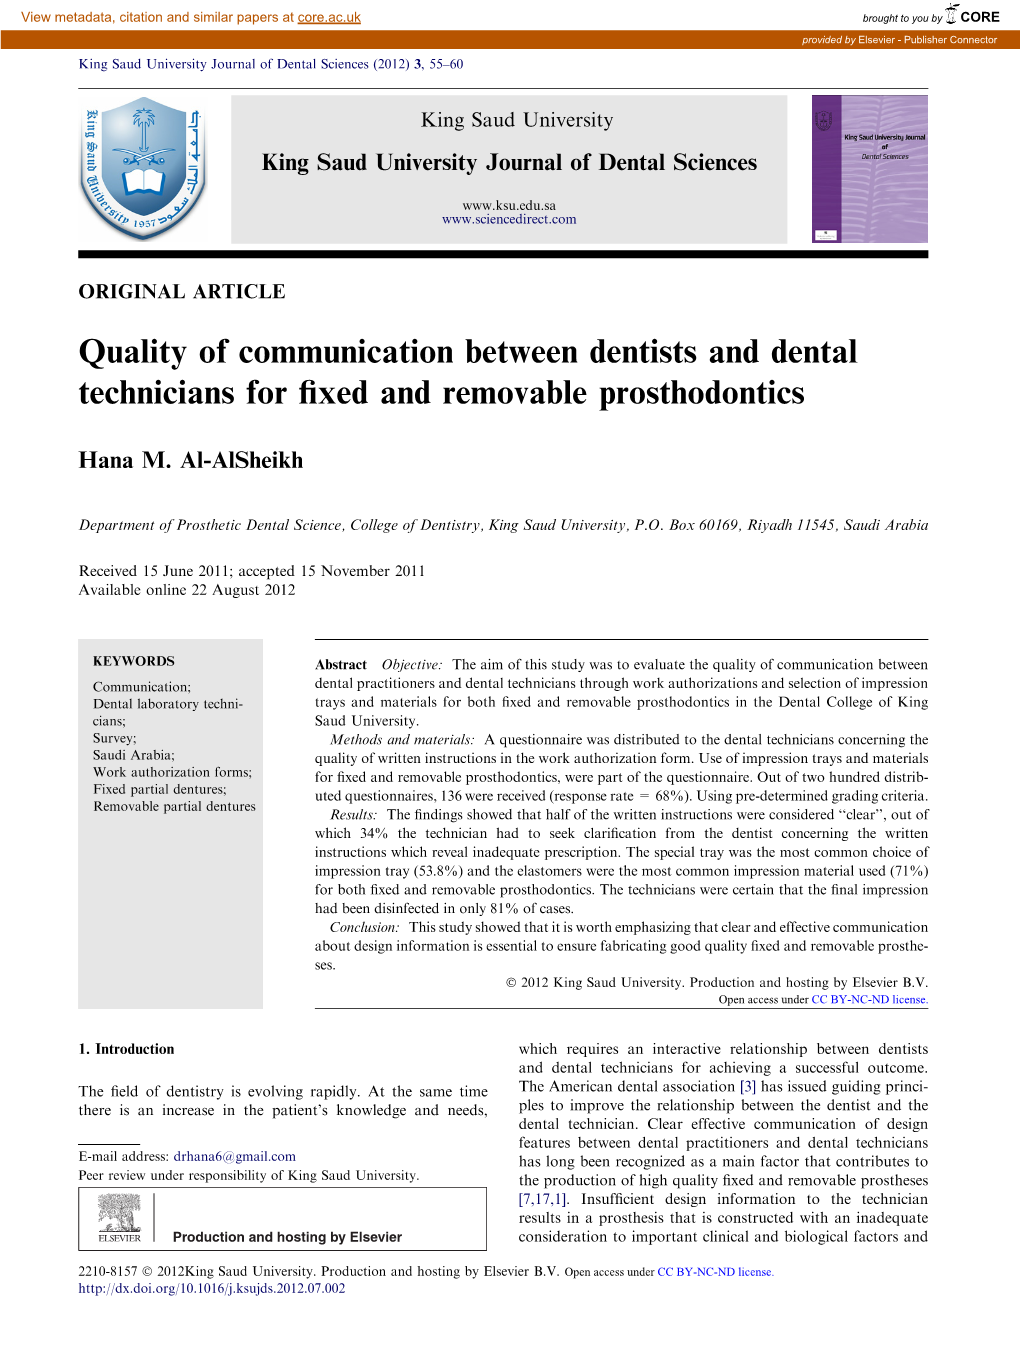 Quality of Communication Between Dentists and Dental Technicians for ﬁxed and Removable Prosthodontics